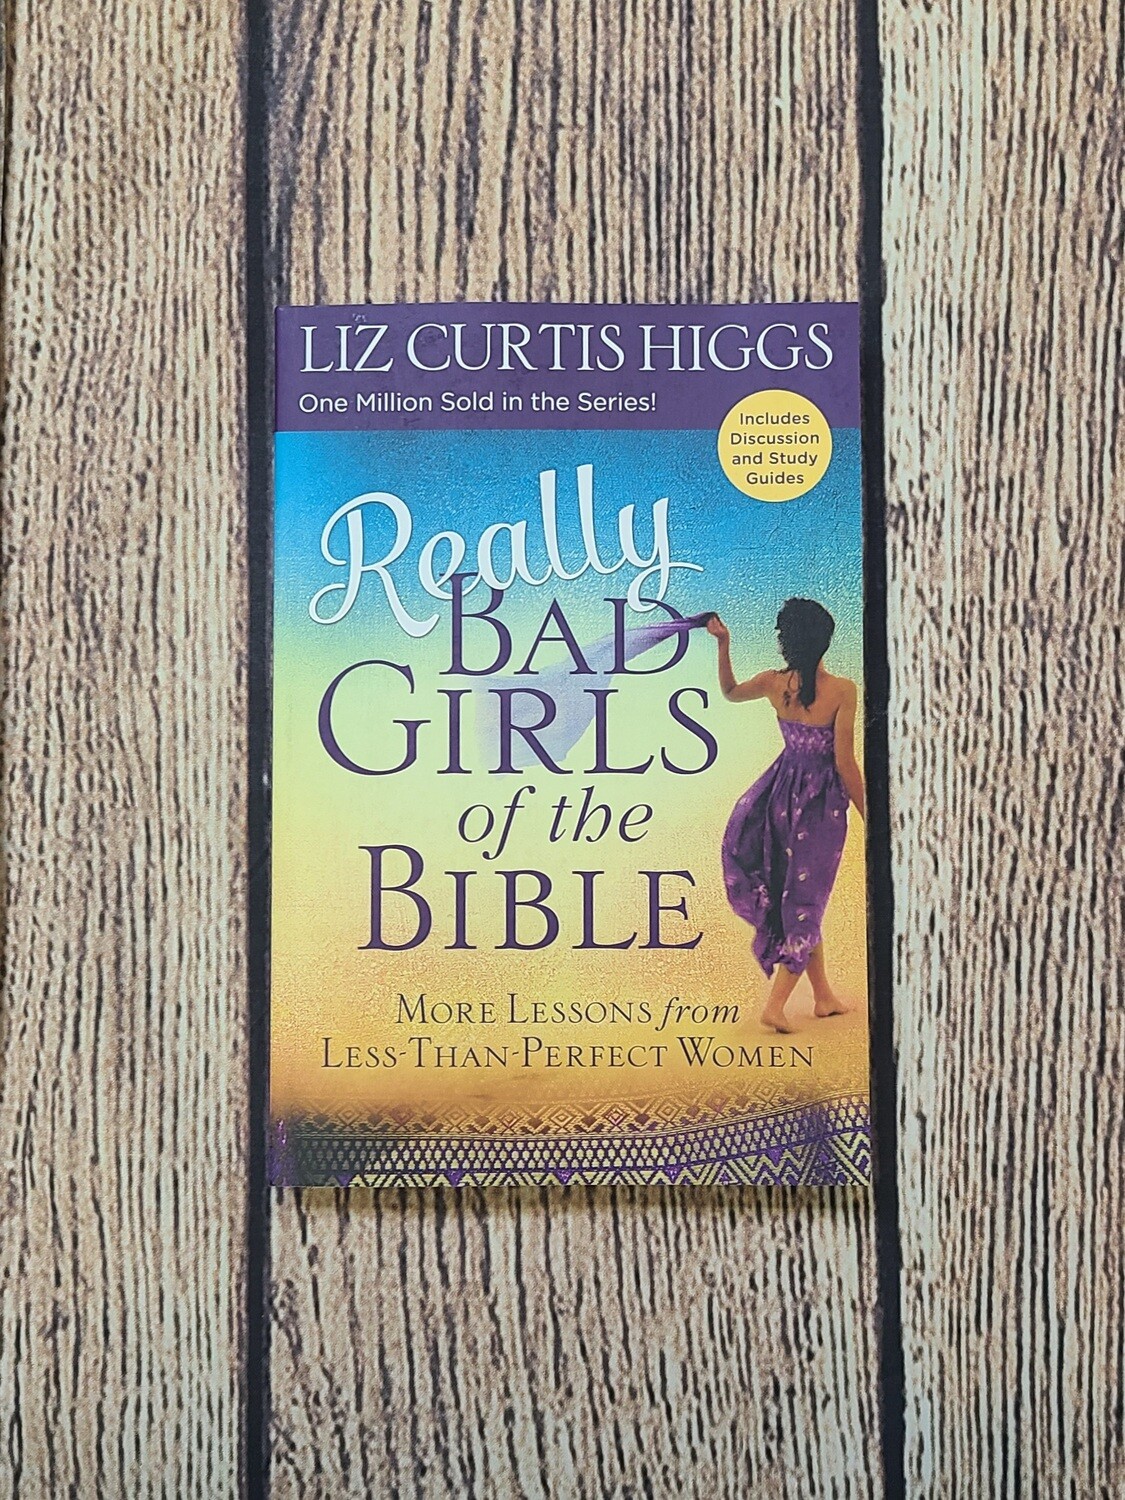 Really Bad Girls of the Bible: More Lessons from Less-Than-Perfect Women with Discussion and Study Guide by Liz Curtis Higgs